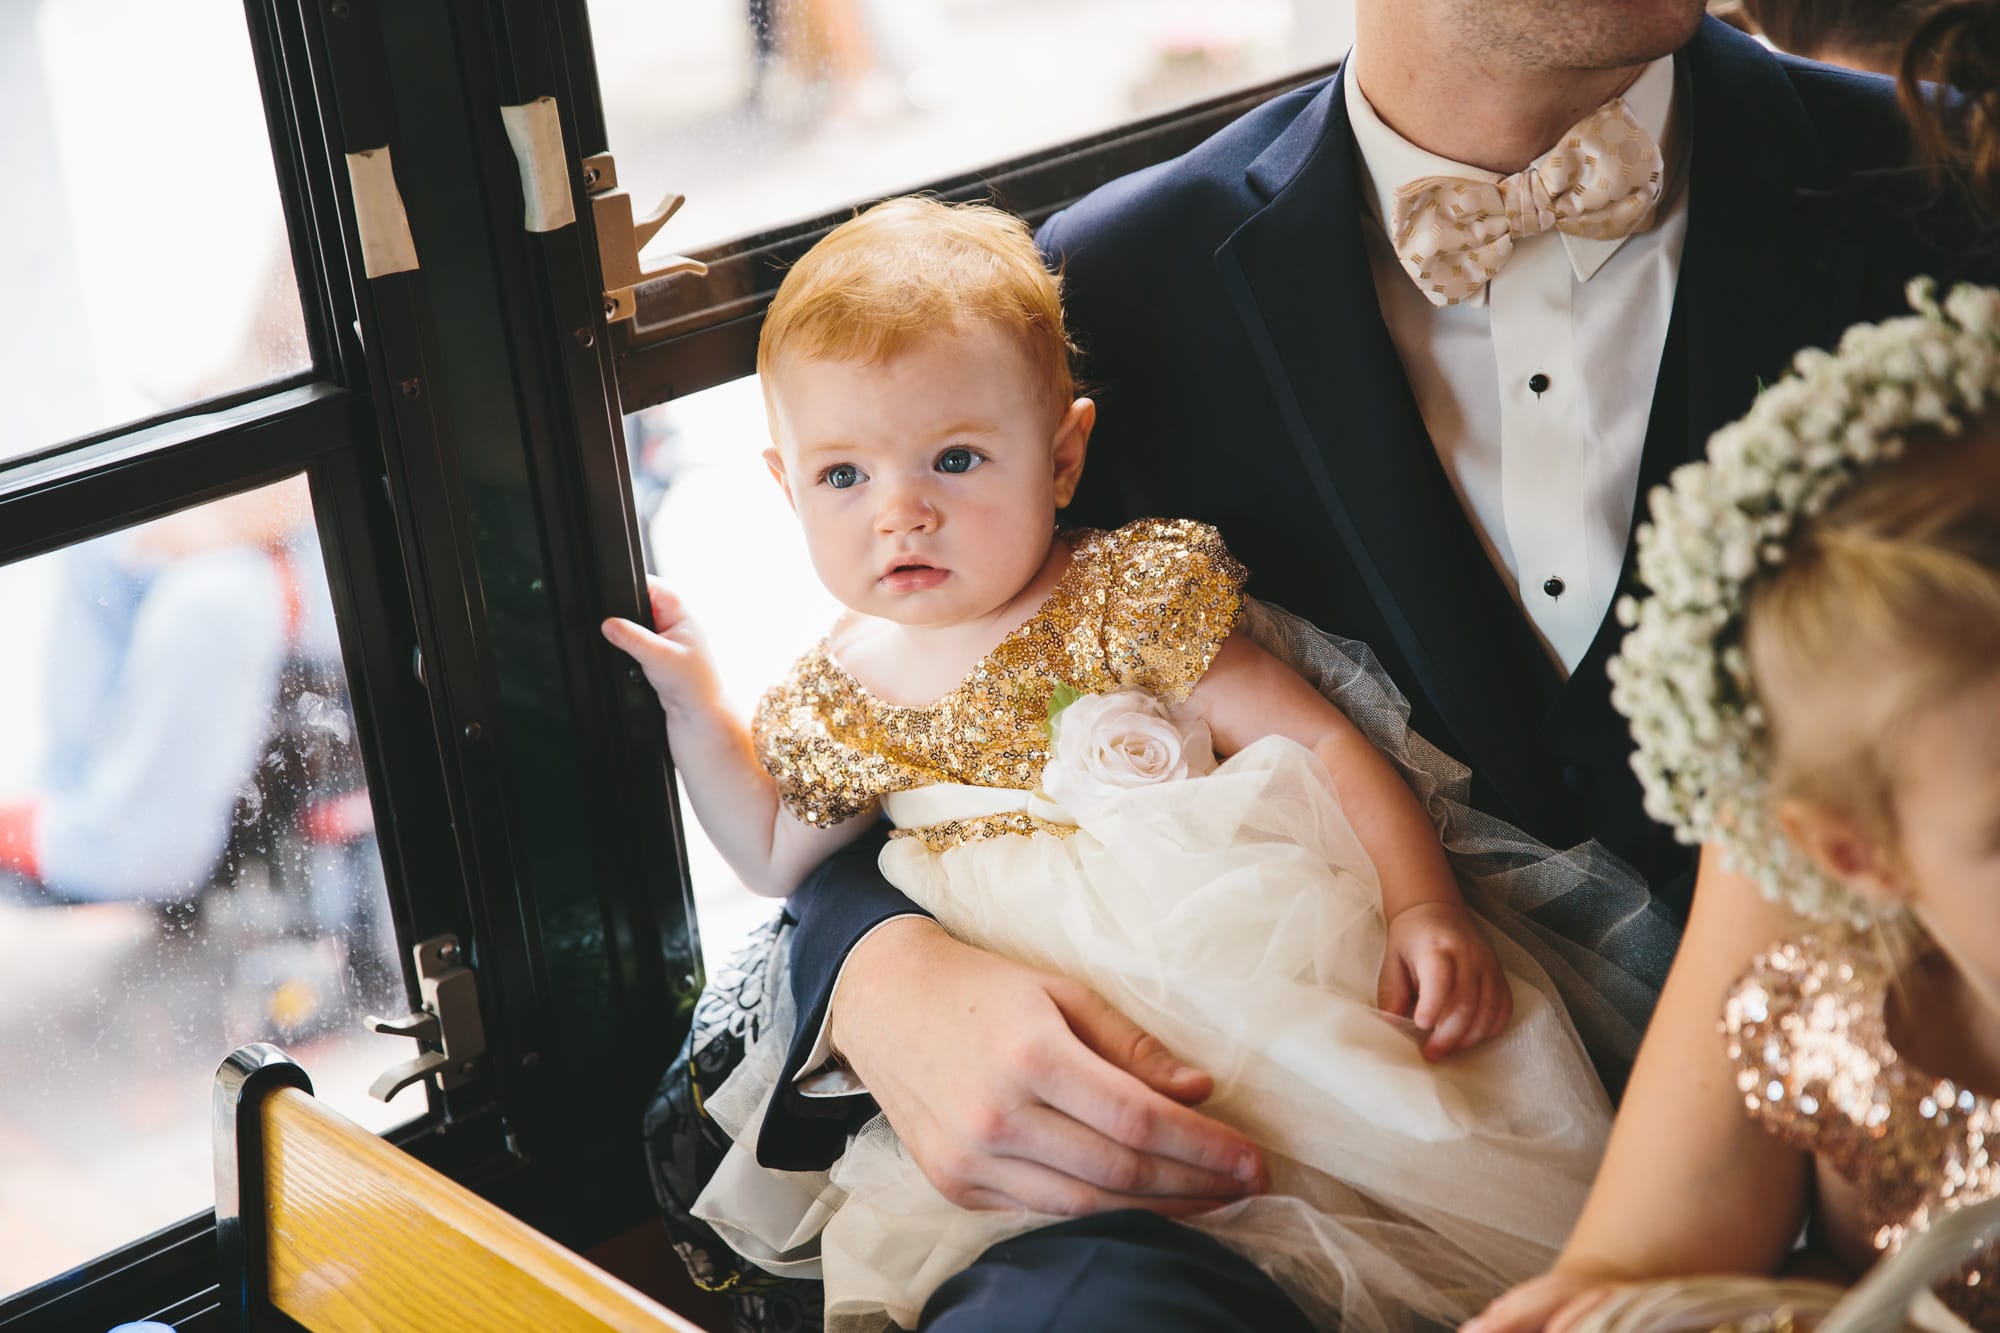 This documentary photograph of a flower girl sitting in a city trolley during a boston wedding is one of the best wedding photographs of 2016